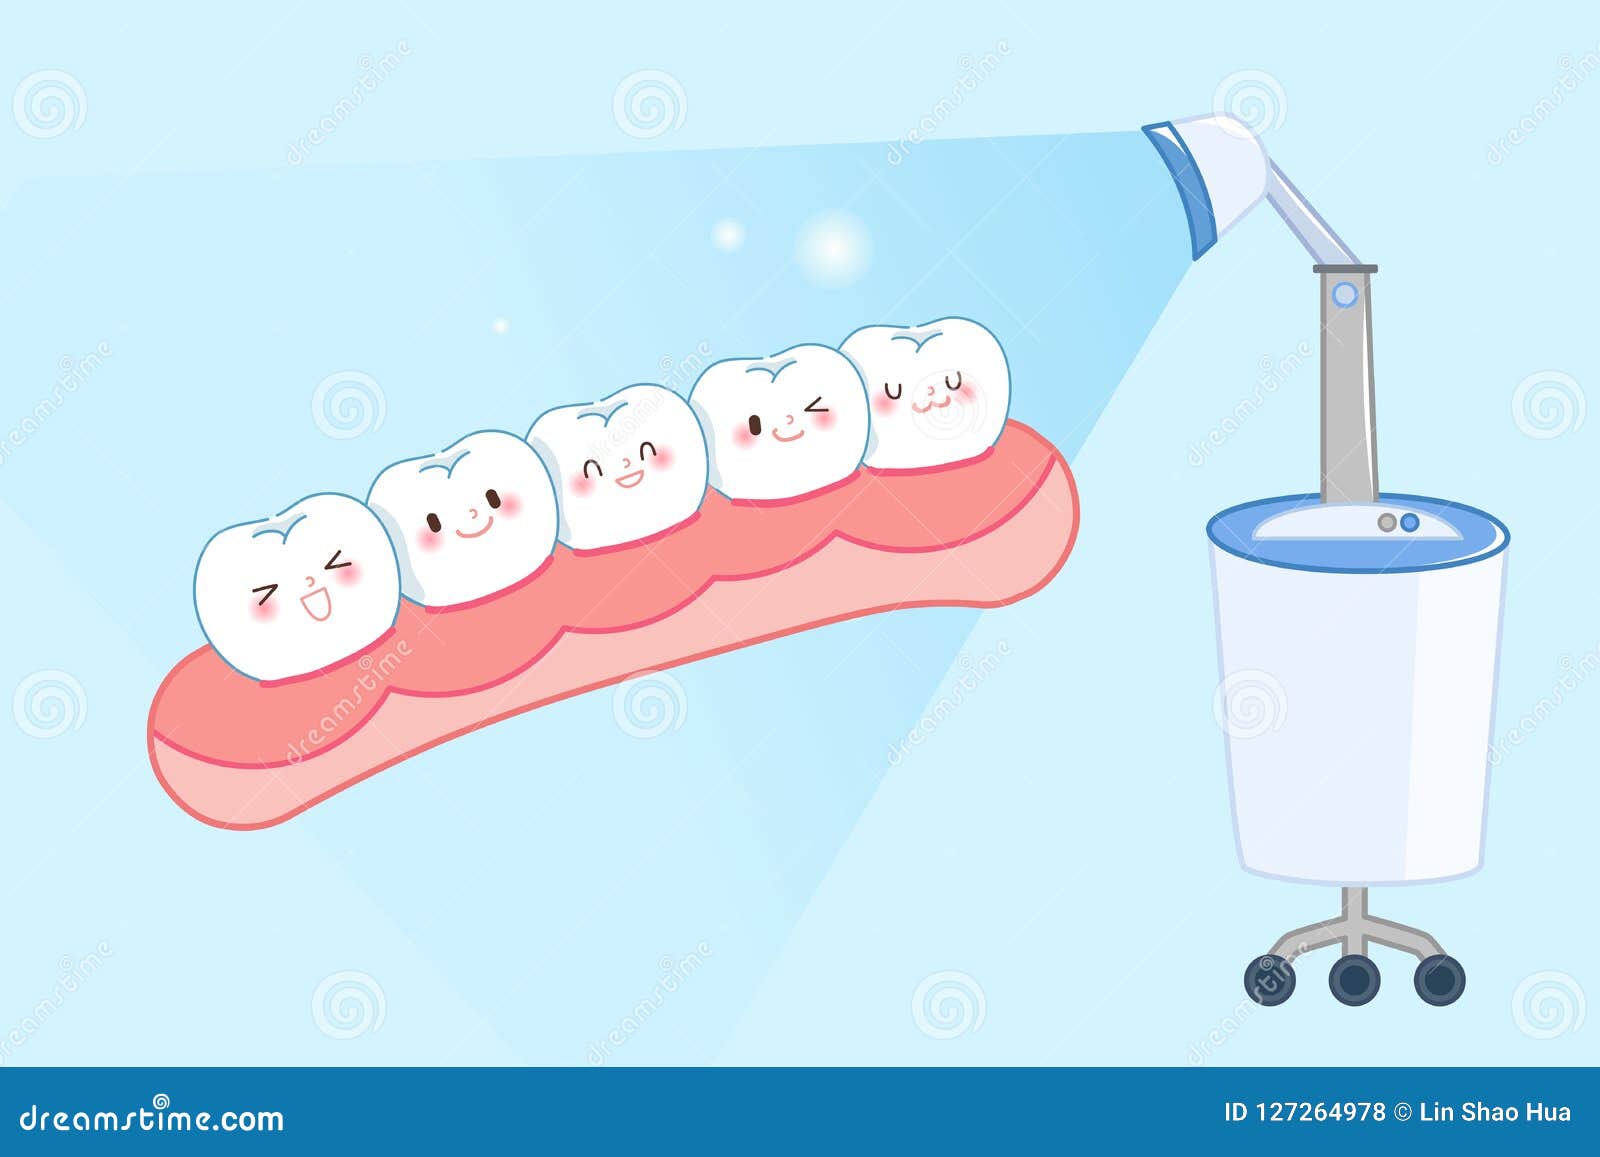 cartoon tooth with whiten concep